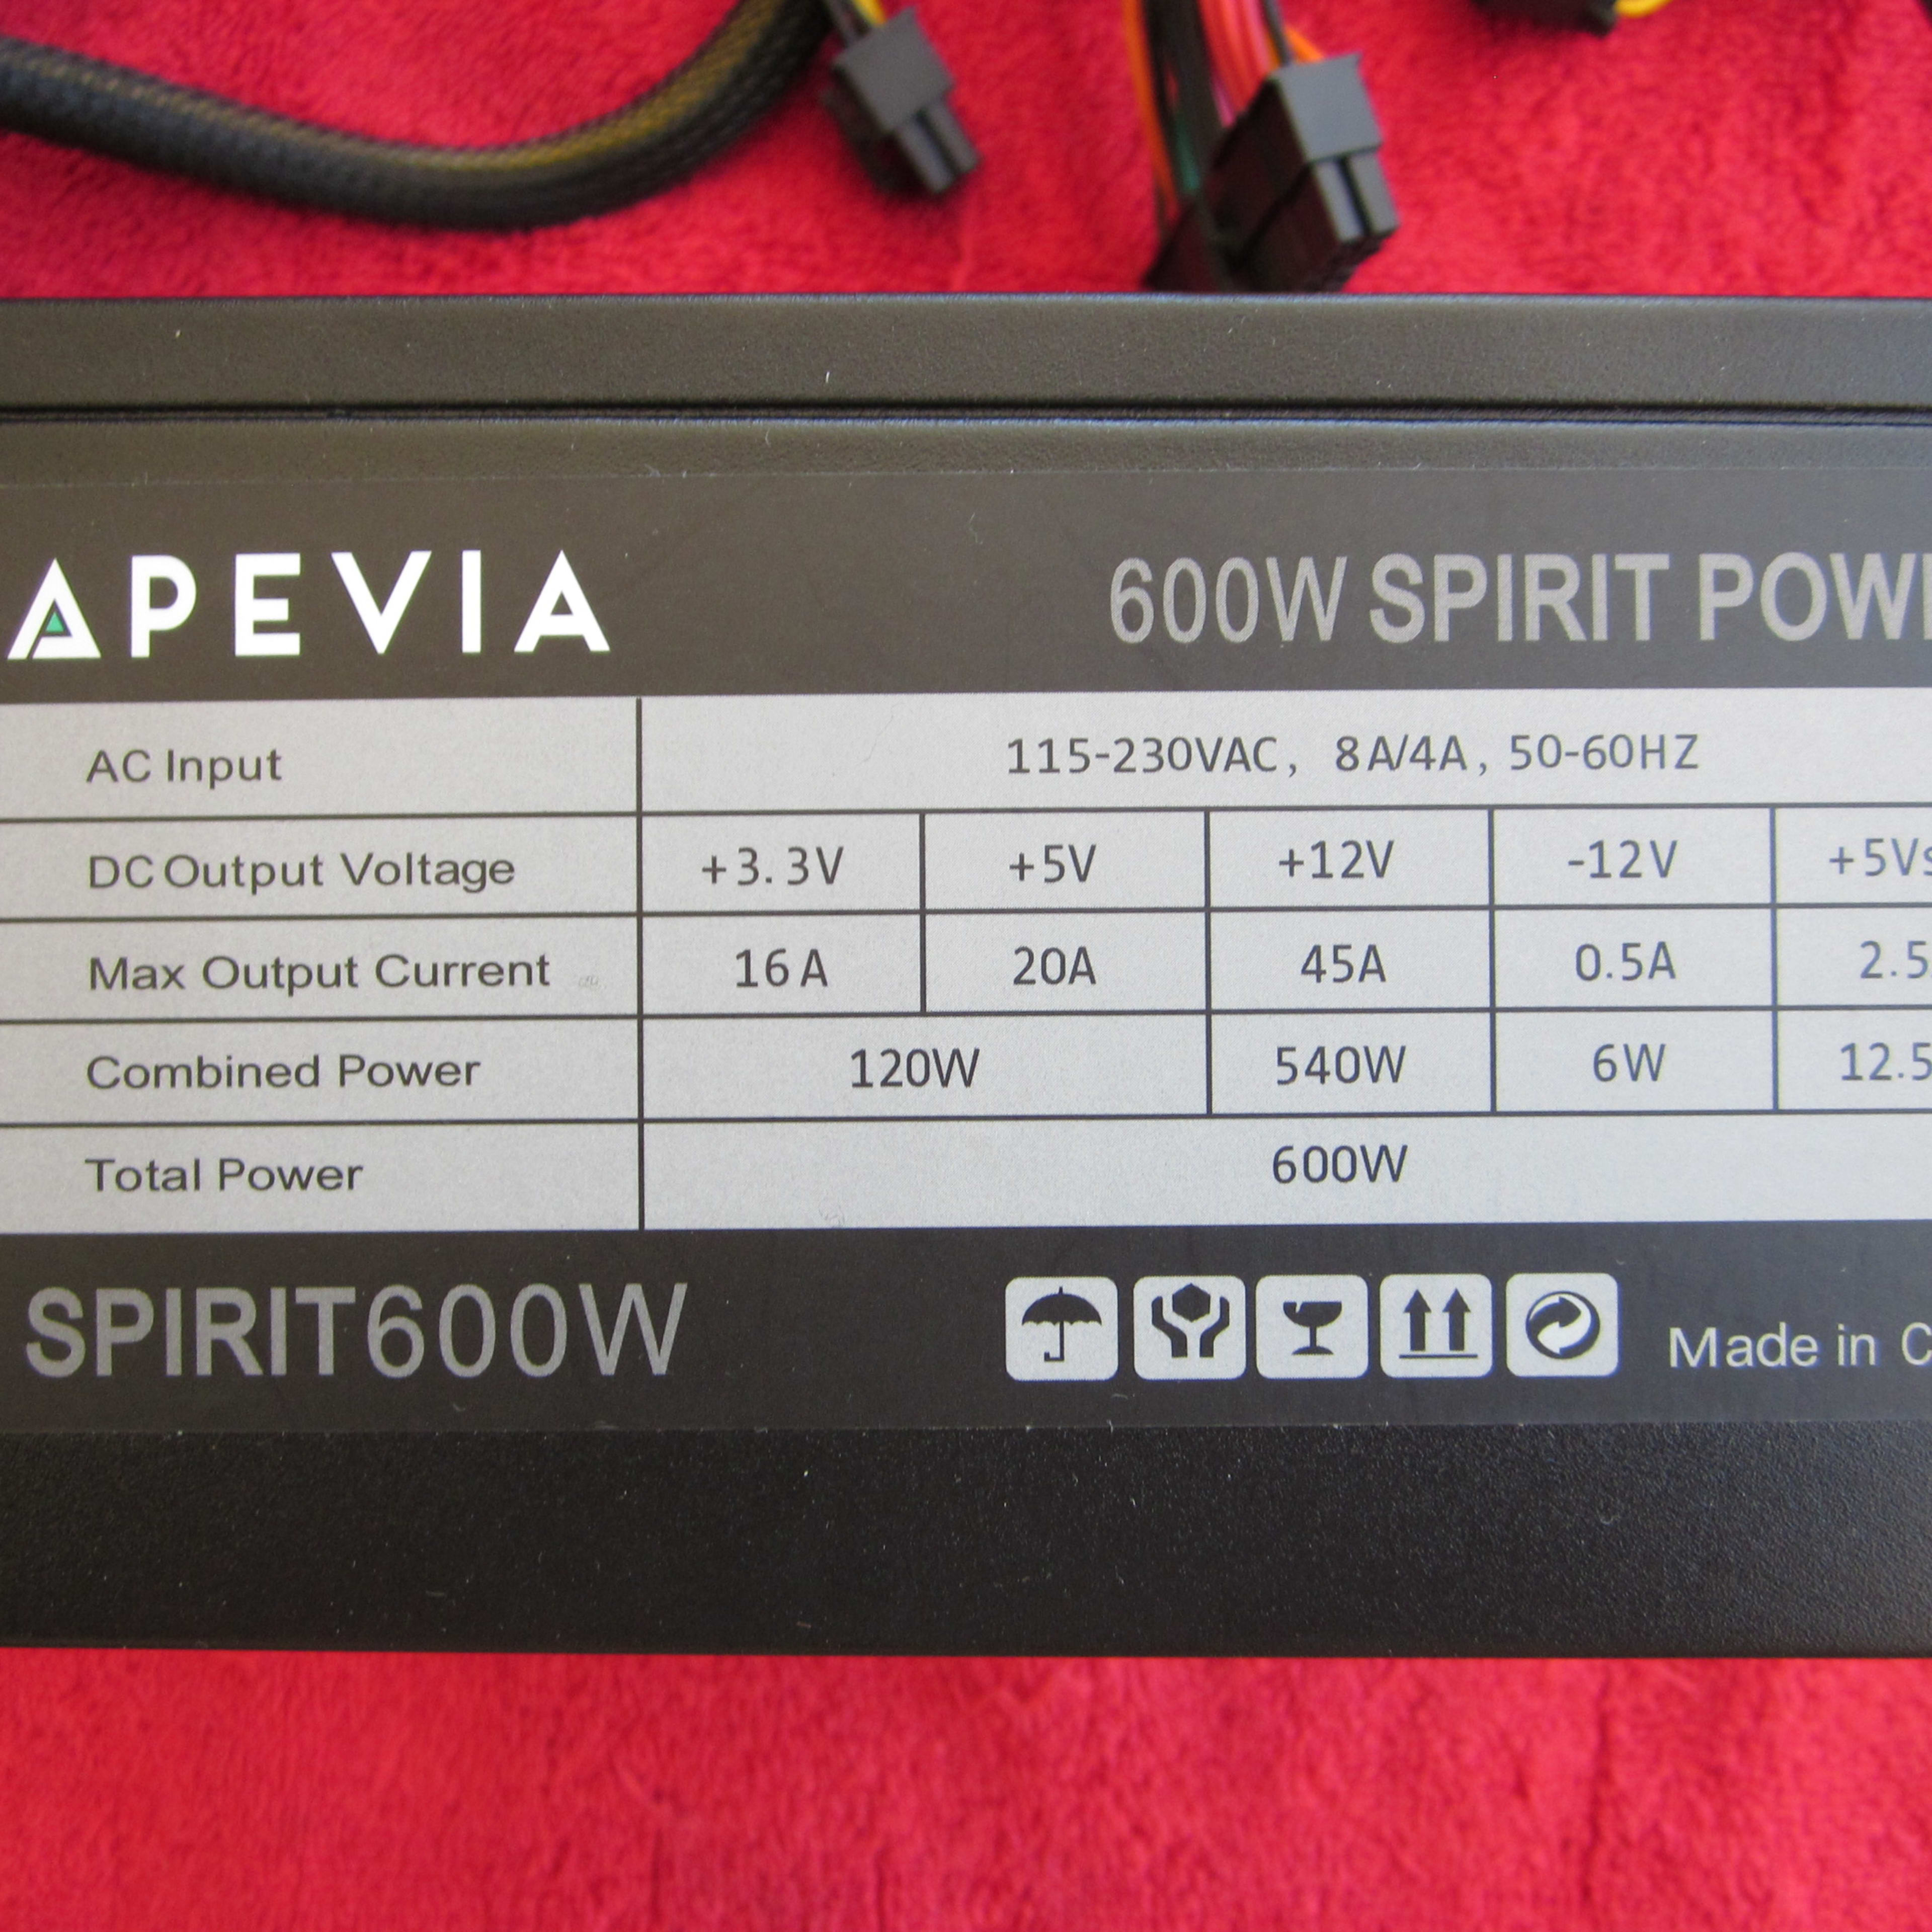 APEVIA SPIRIT 600W ATX Power Supply with Auto-Thermally Controlled 120mm Fan, All Protections